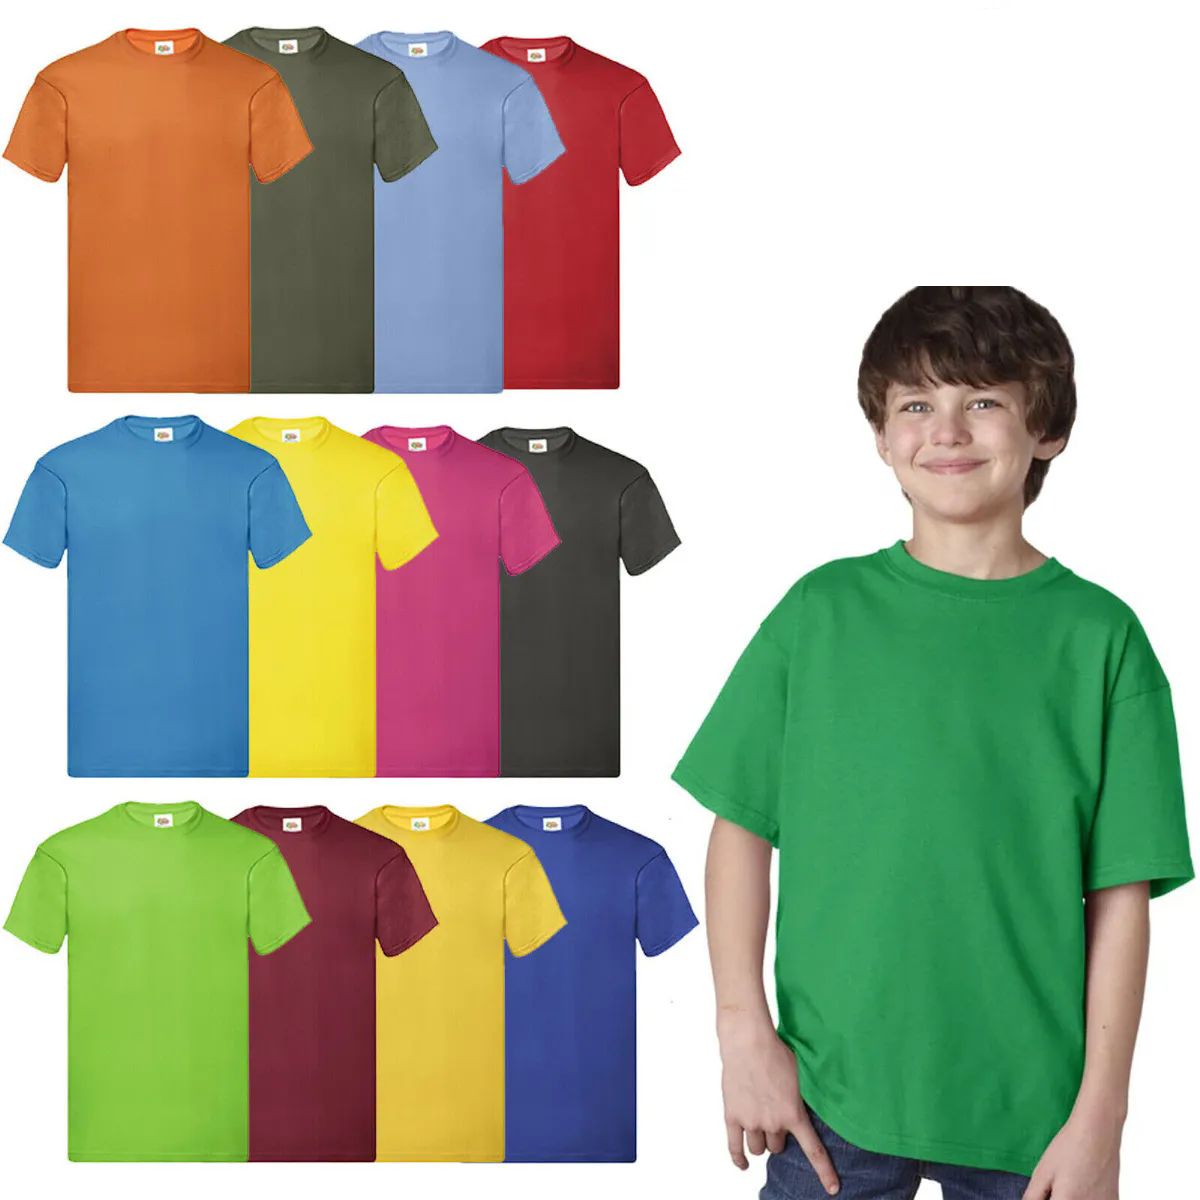 504 Pieces of Billion Hats Kids Youth Cotton Assorted Colors T Shirts Size S